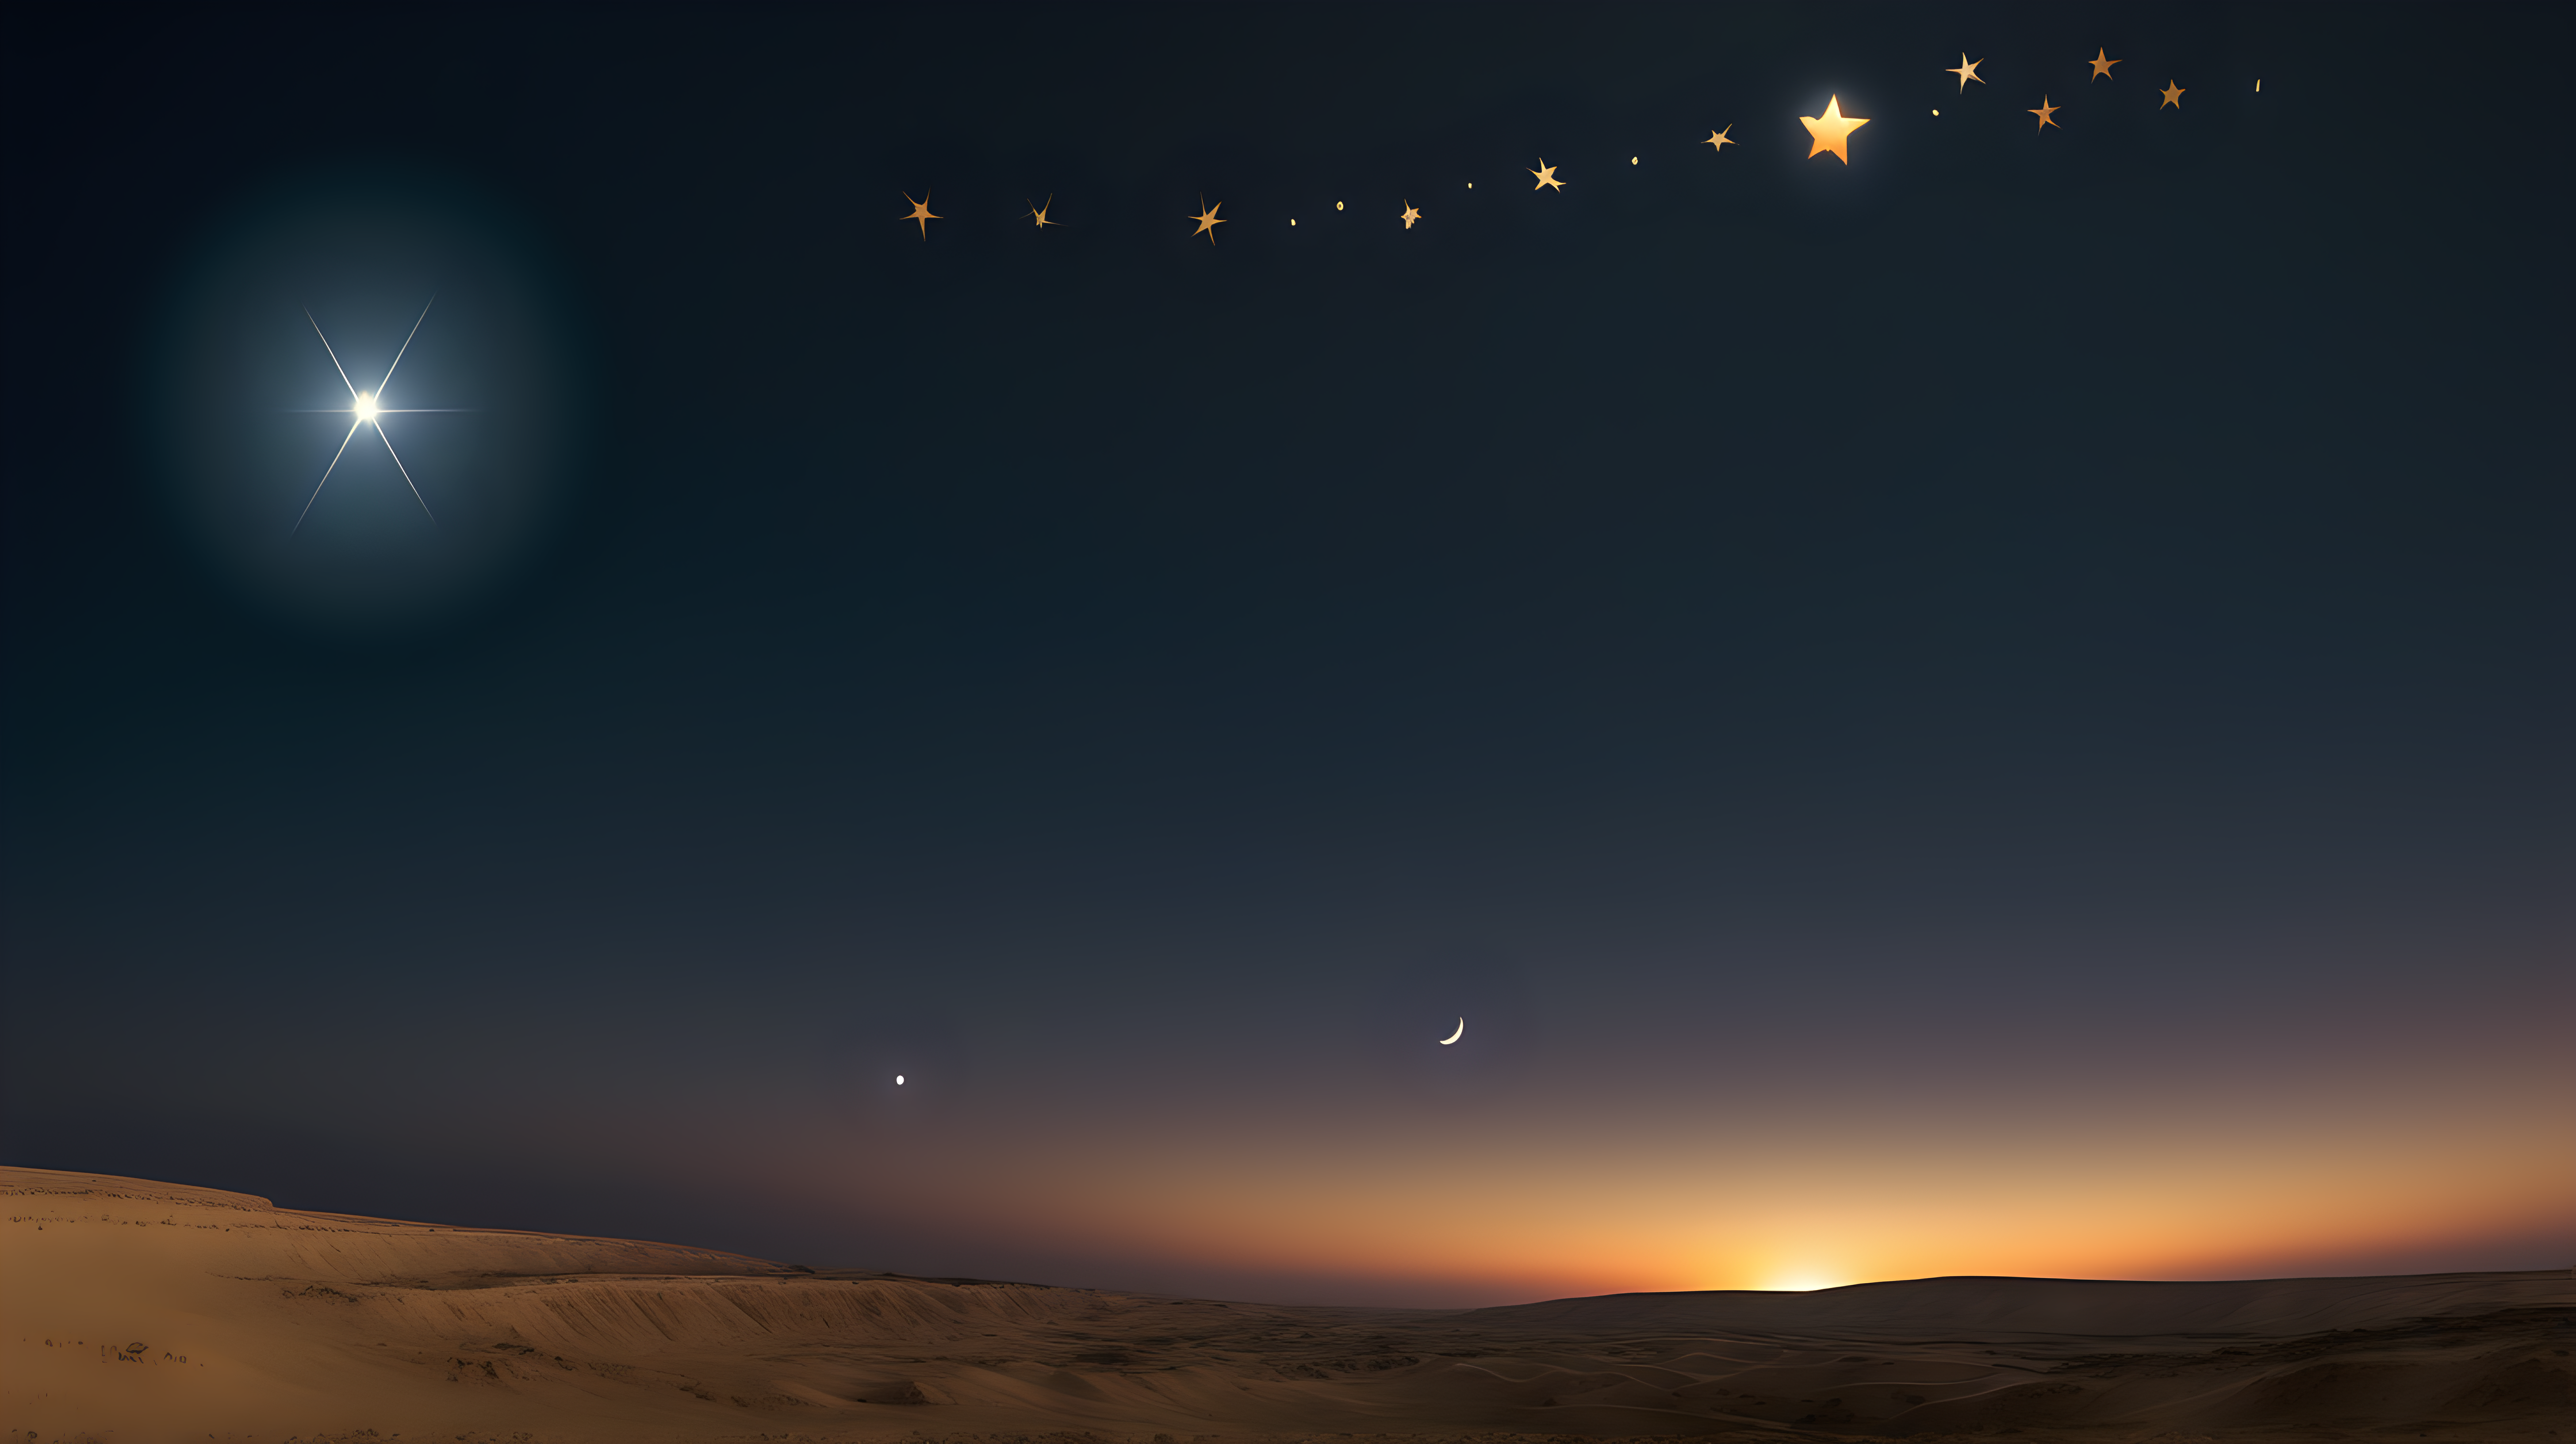 surreal Night sky in Negev of Israel with 11 small stars beneath one large star at the top, at the bottom of the image a small moon, and a  small sun 